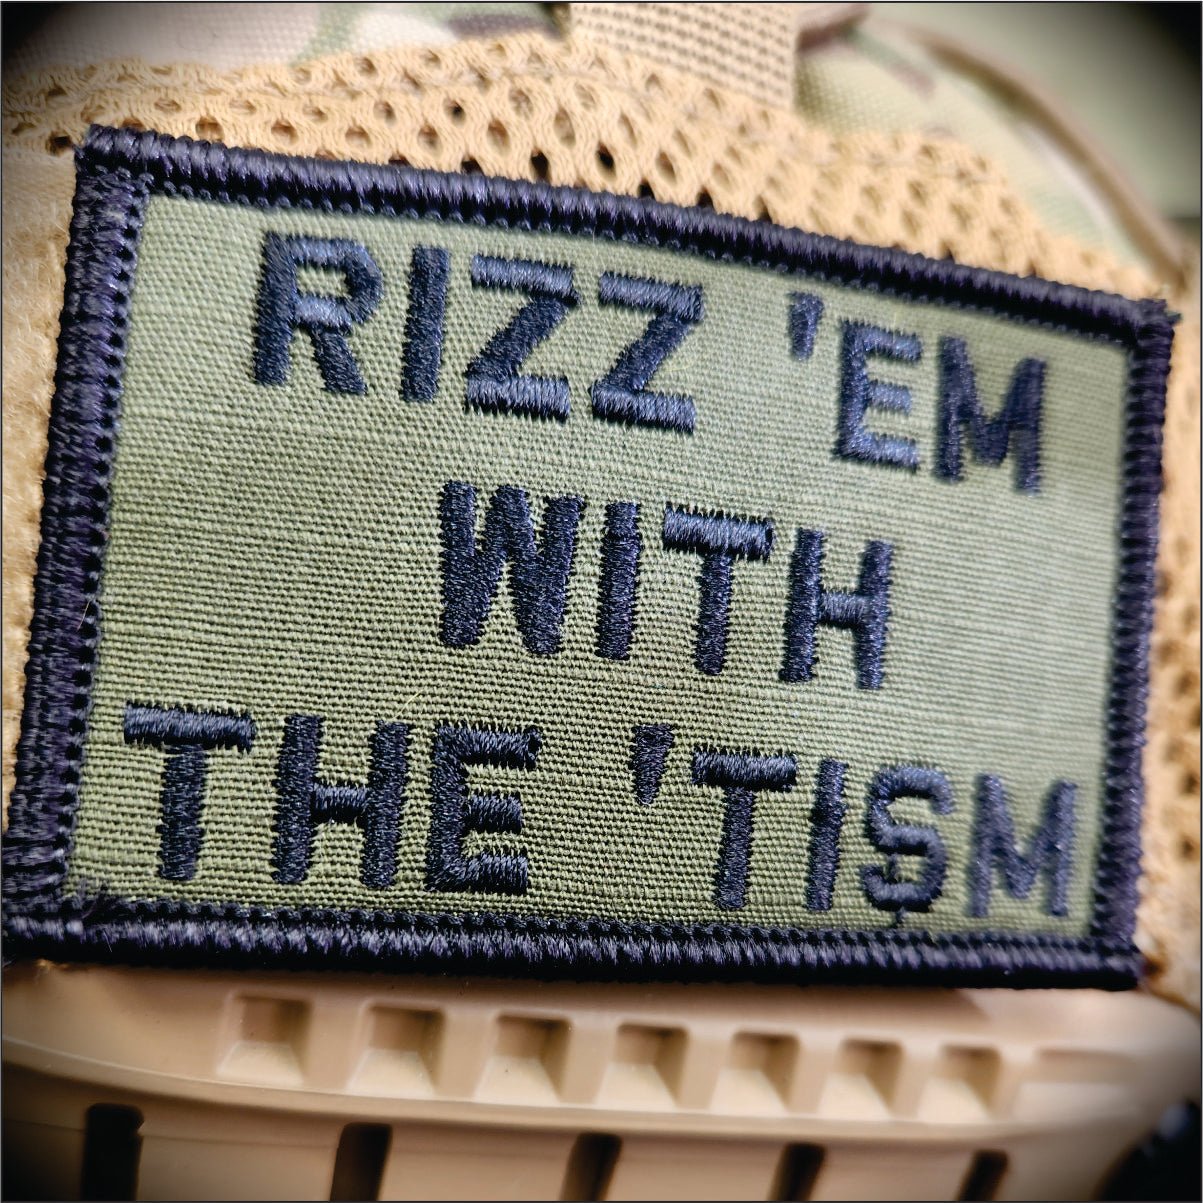 Rizz 'Em With The 'Tism Playful Unique Gen Z Style Embroidered Patch - 2x3 inches